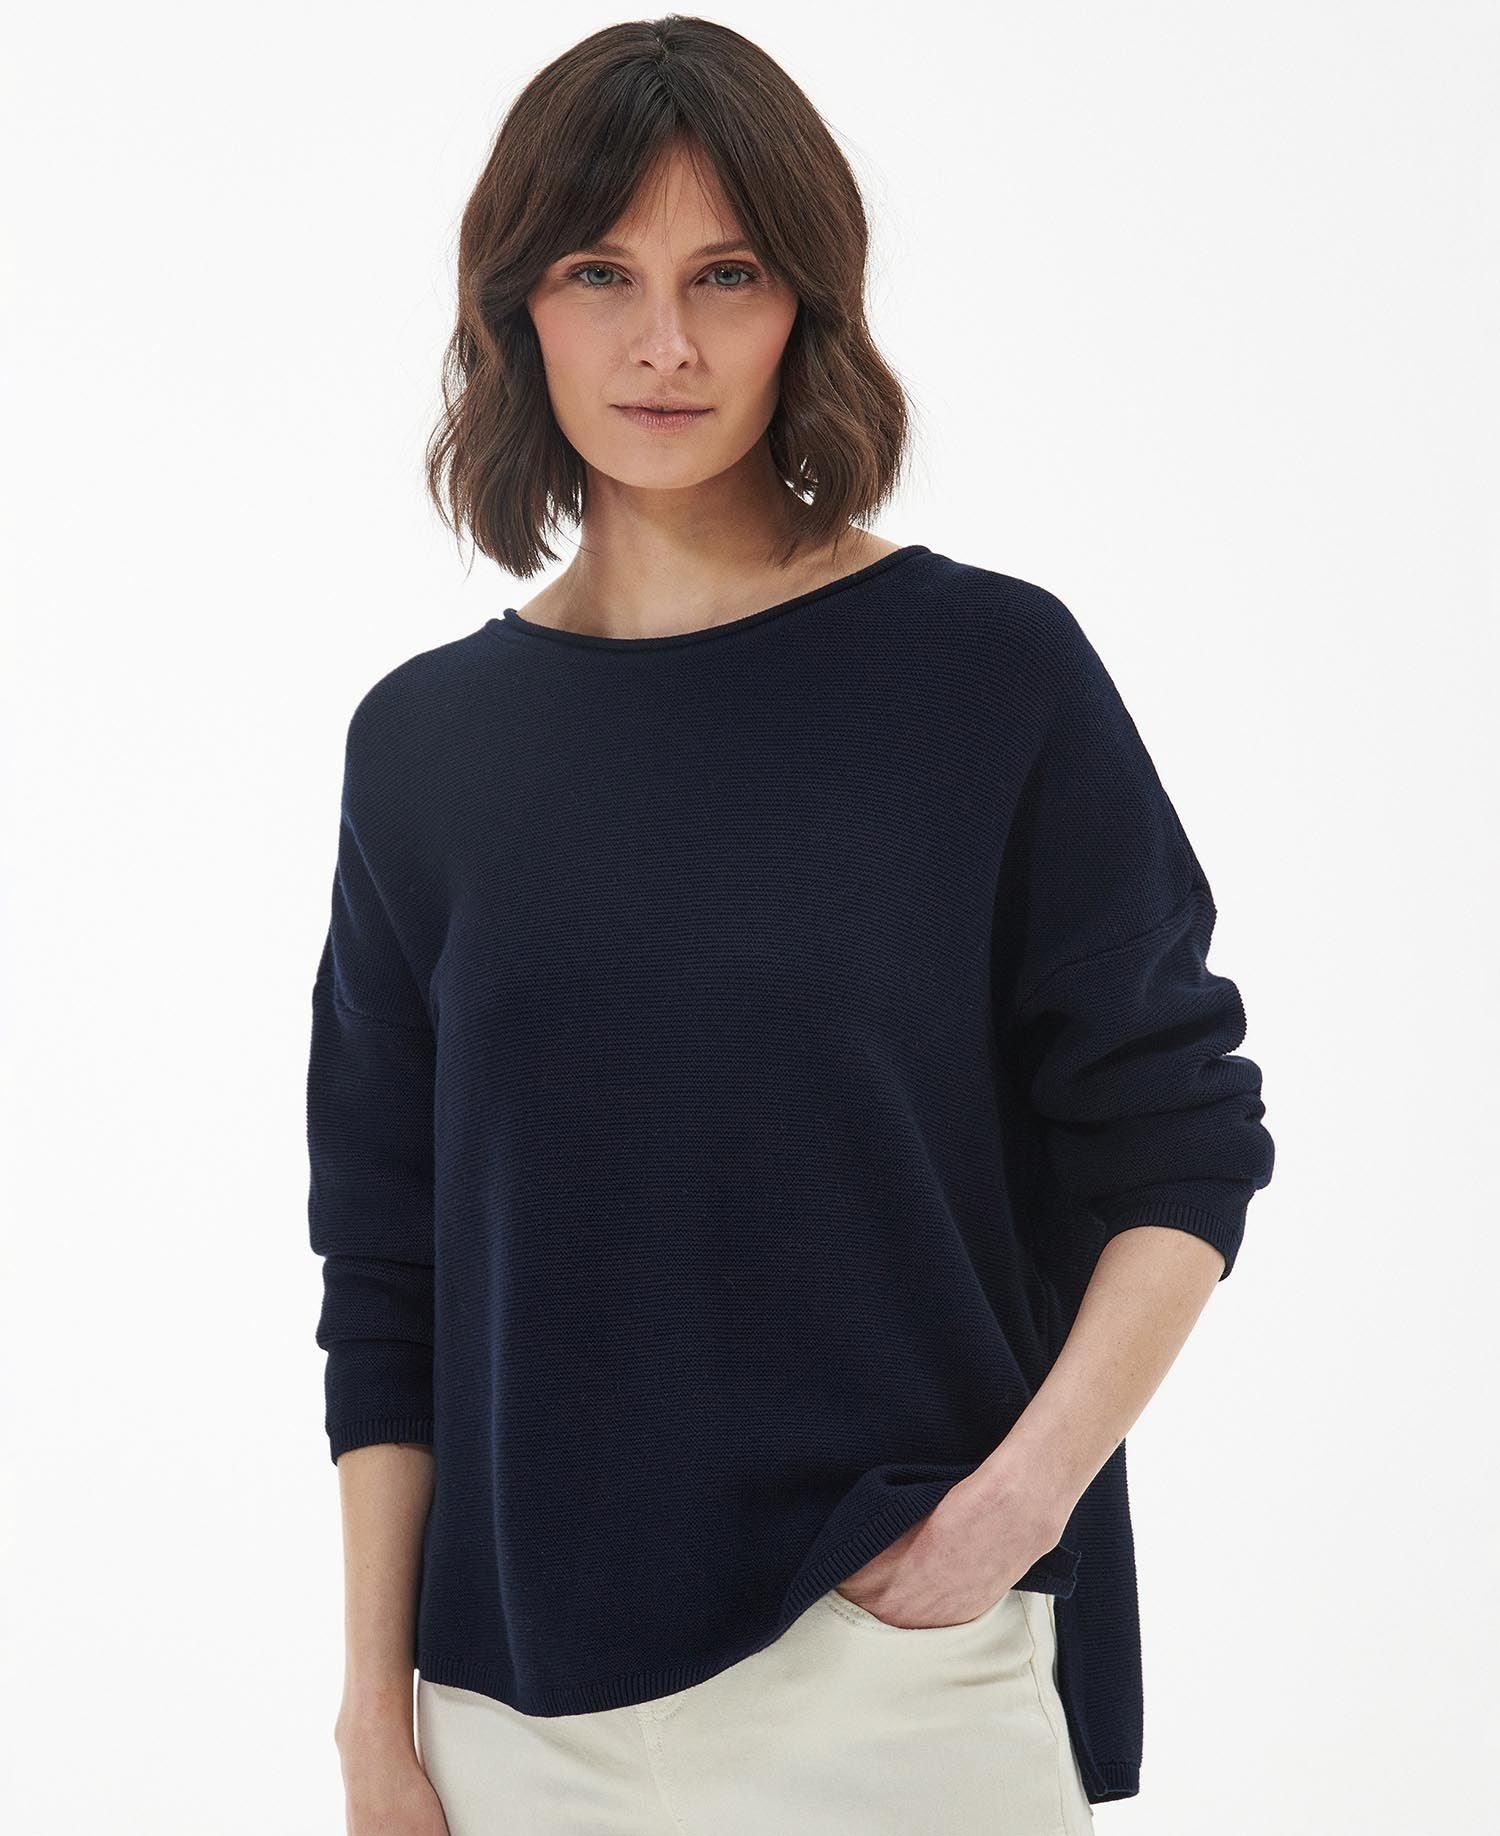 Barbour Marine Knitted Jumper Navy